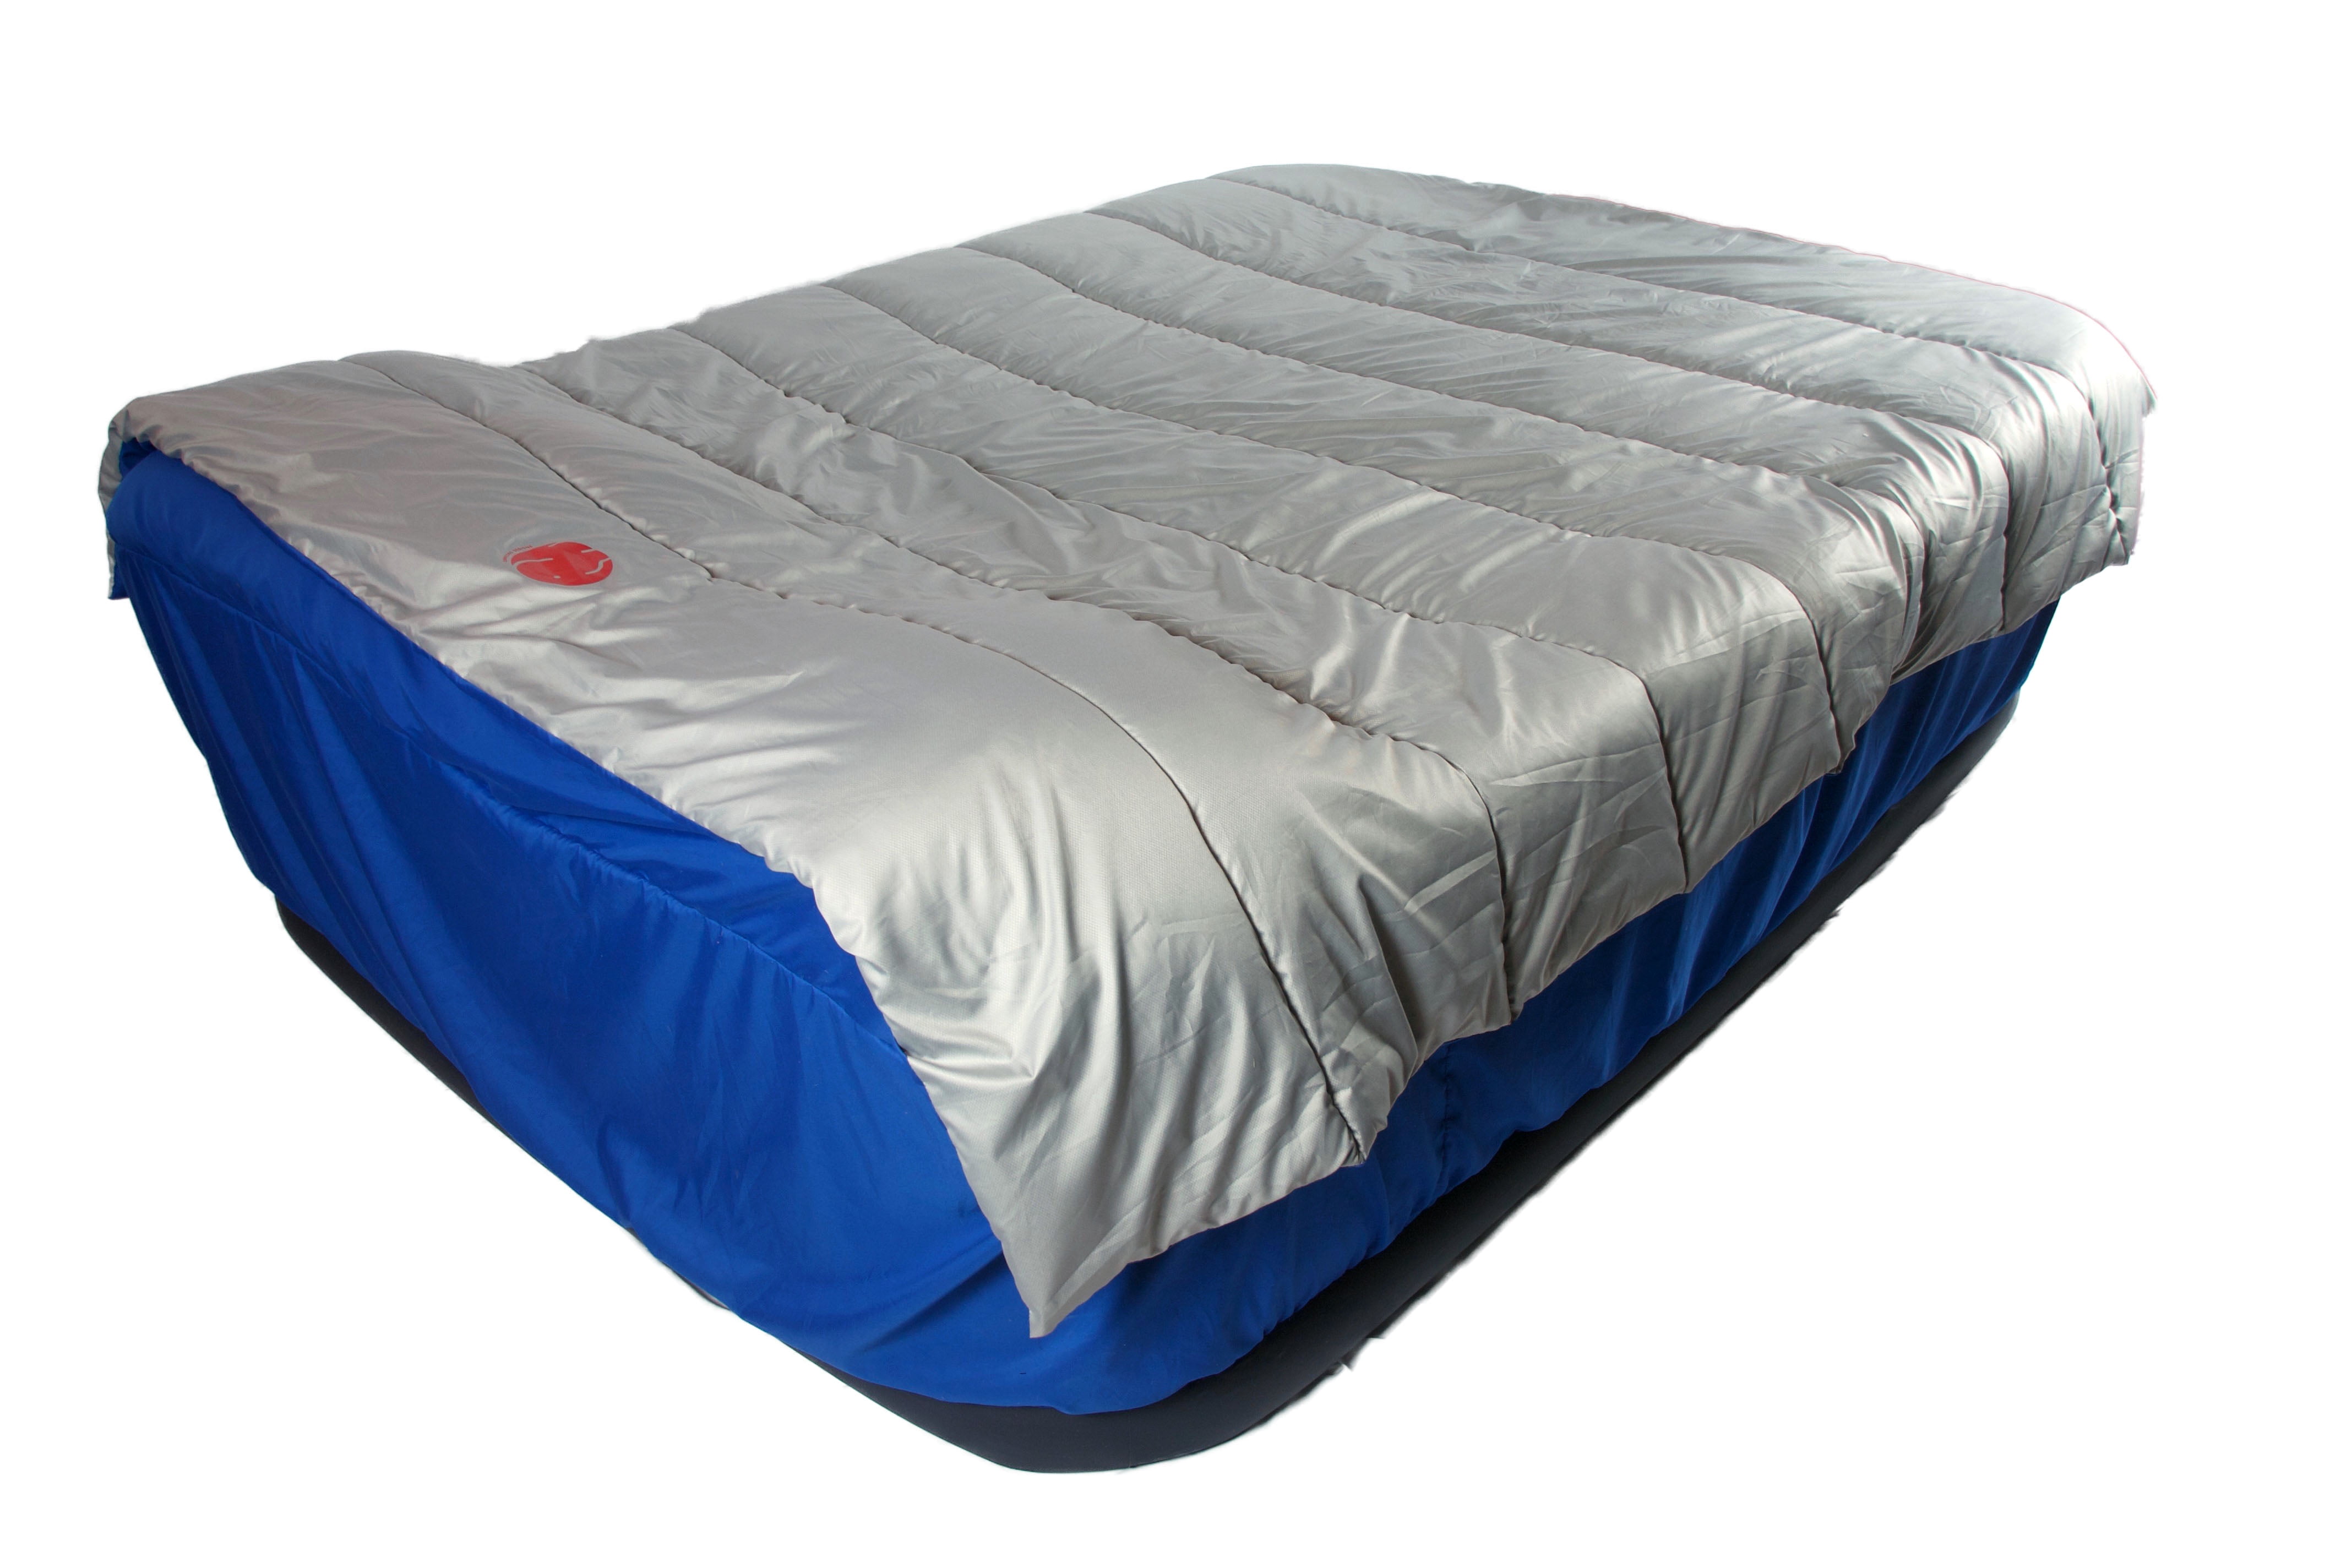 OmniCore Designs QuikSleep AirBed / Mattress Sheet Set Bedding (Queen and  Twin sizes) - Ultra Portable & Instant Set Up